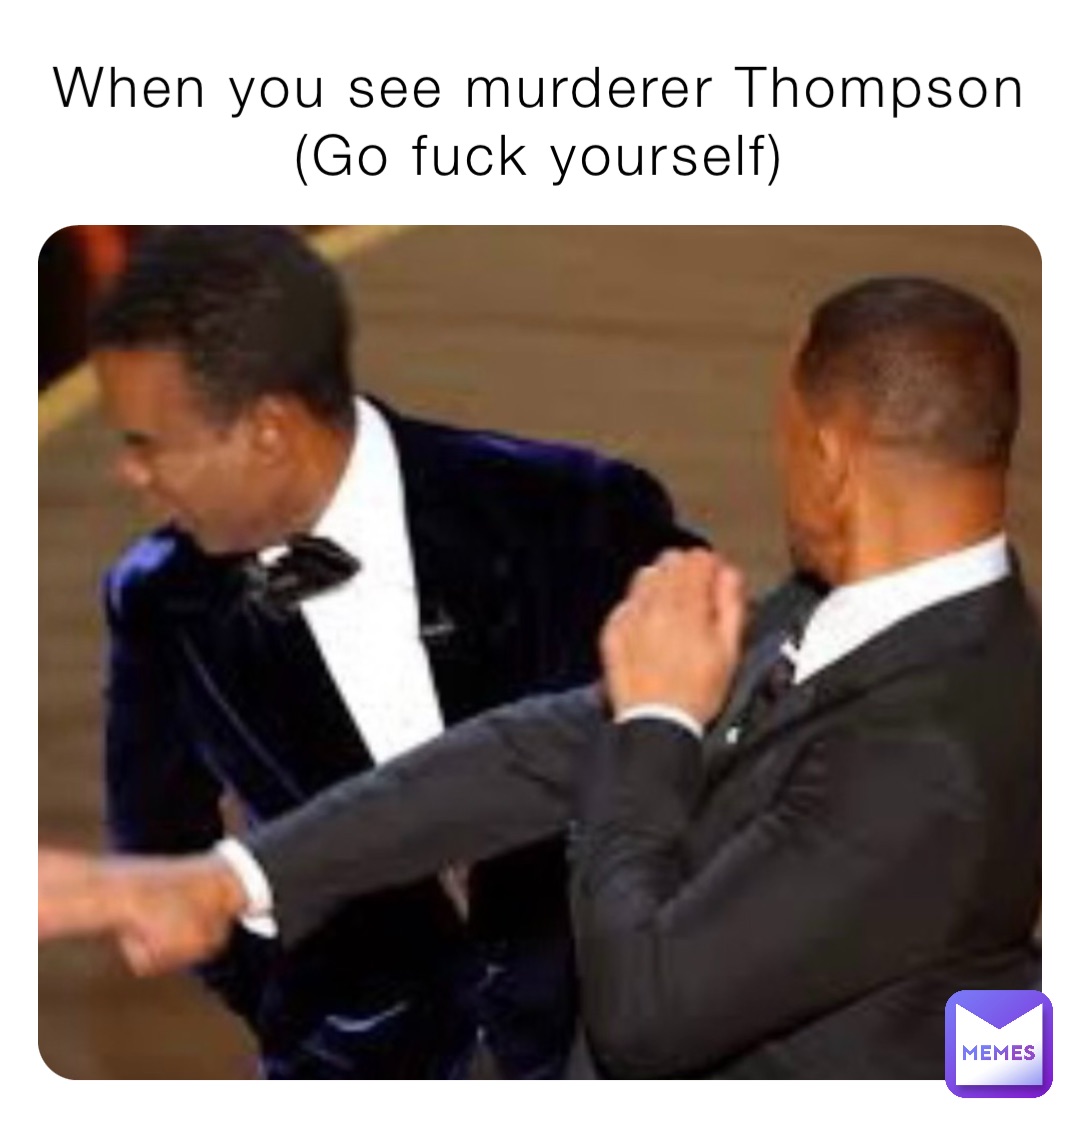 When you see murderer Thompson 
(Go fuck yourself)